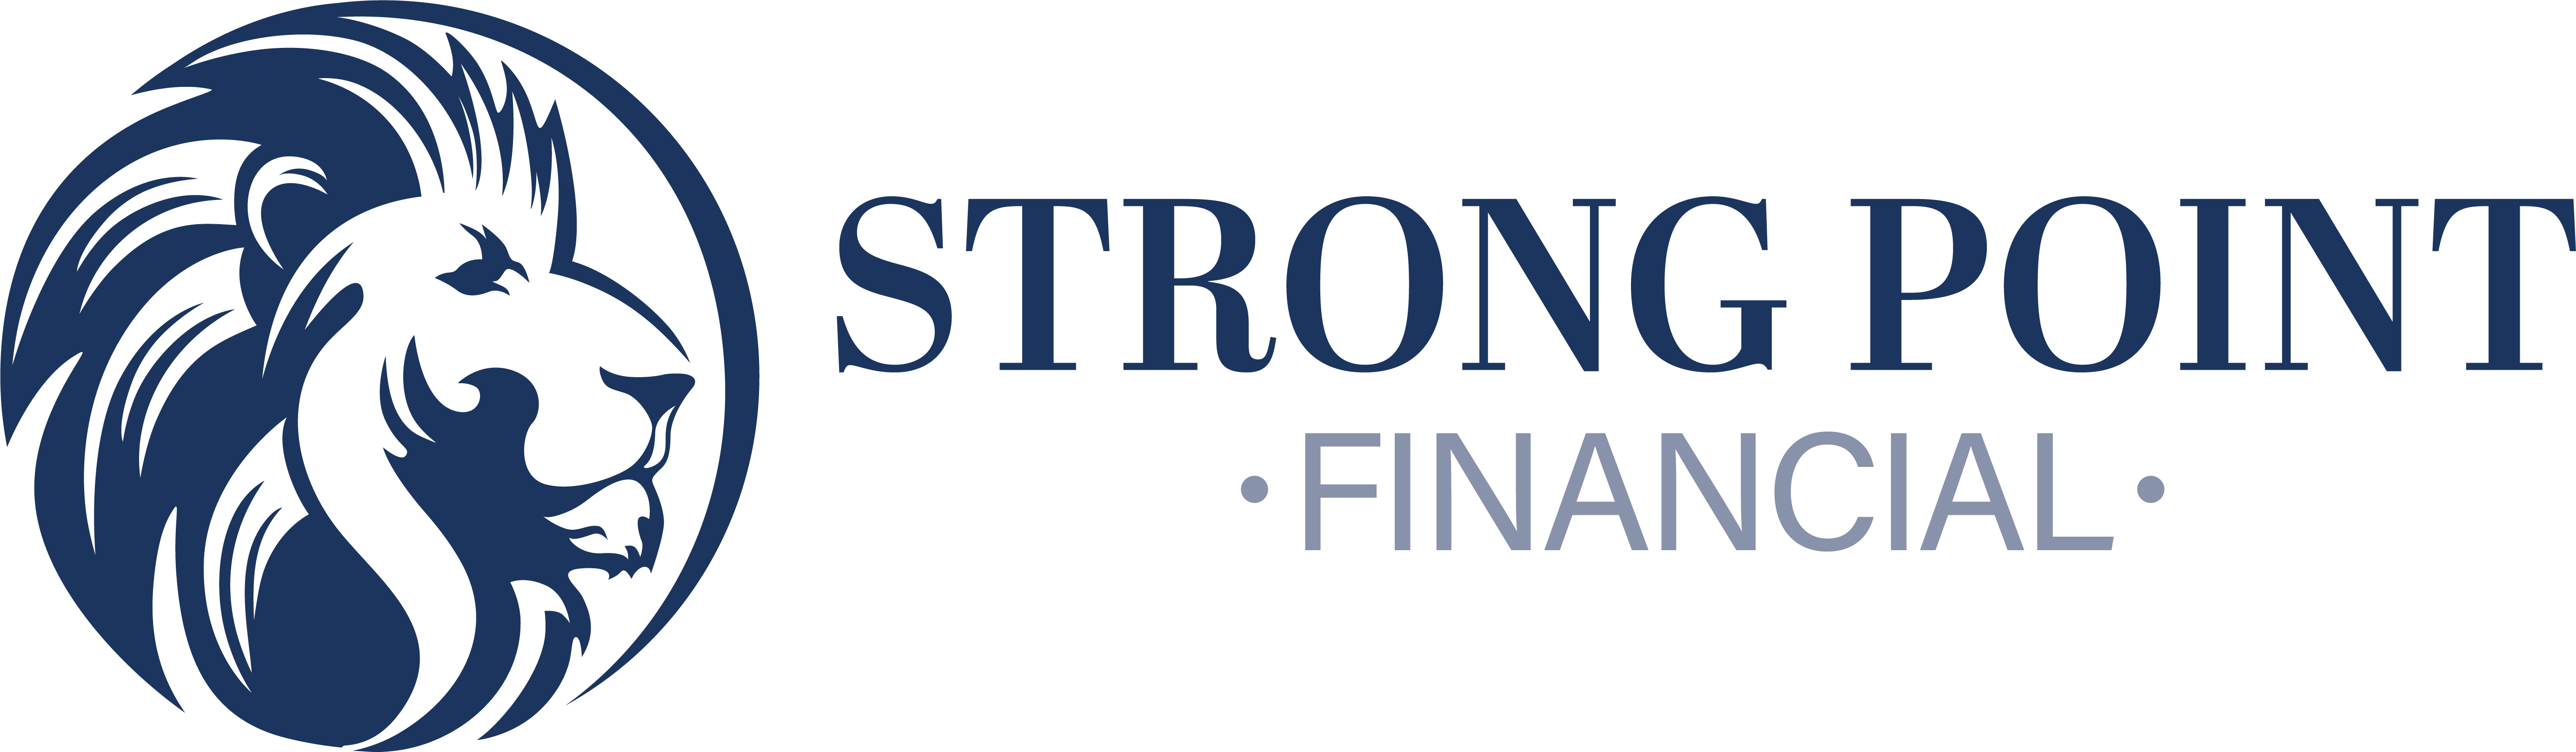 Strong Point Financial Inc Logo